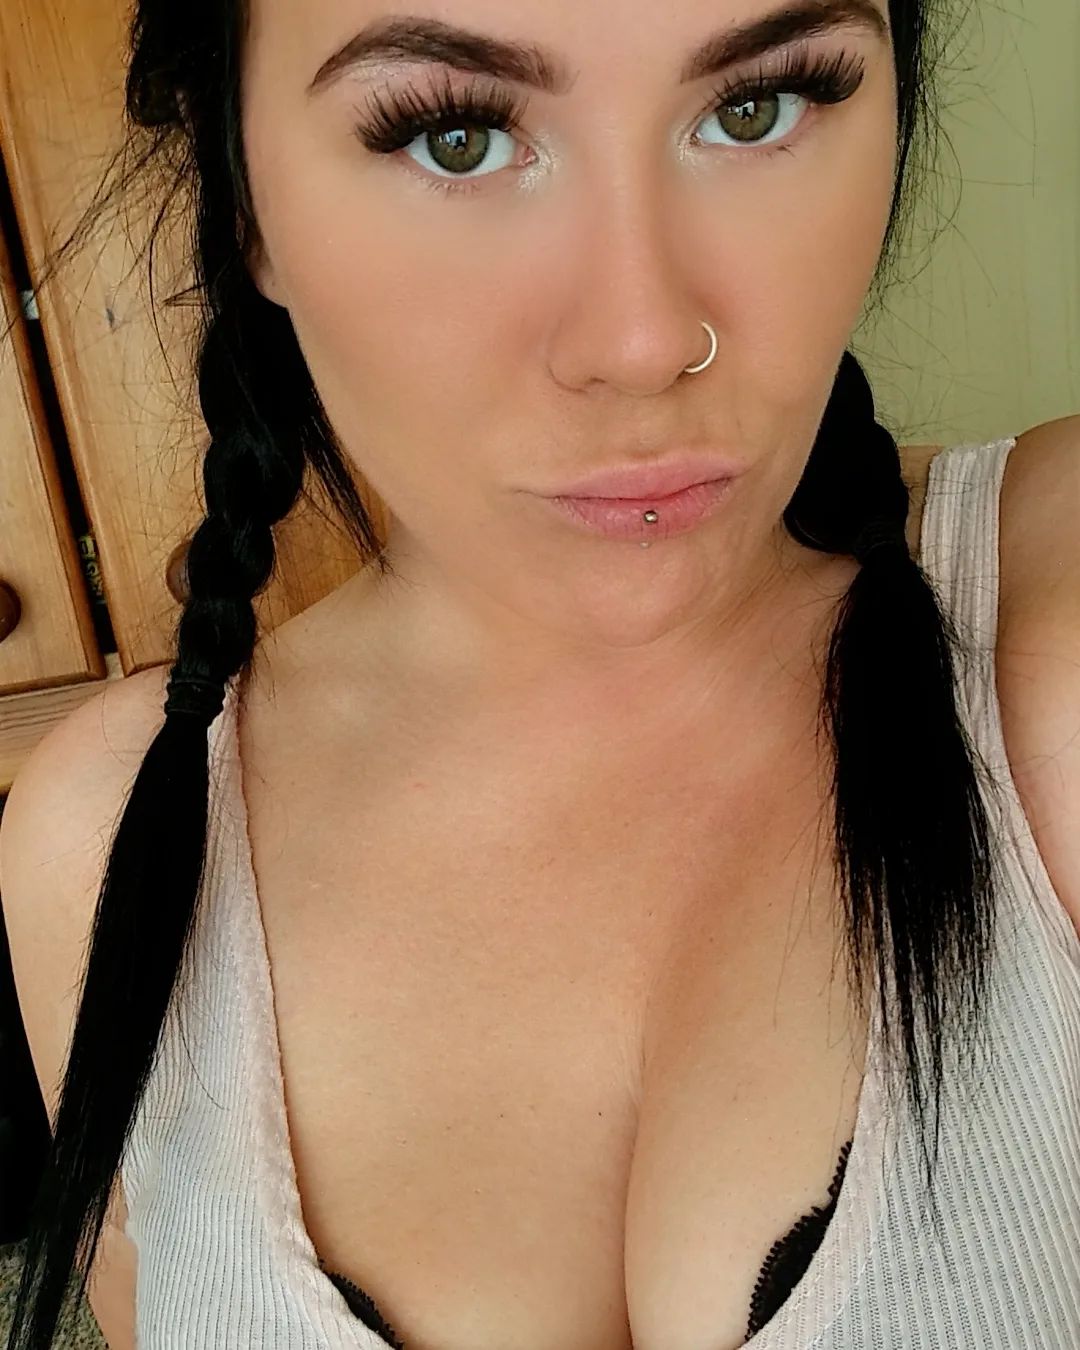 It's a pigtail kind of day 😍 happy bank holiday 💖 what's your plans ? 
#bankholiday #pigtails